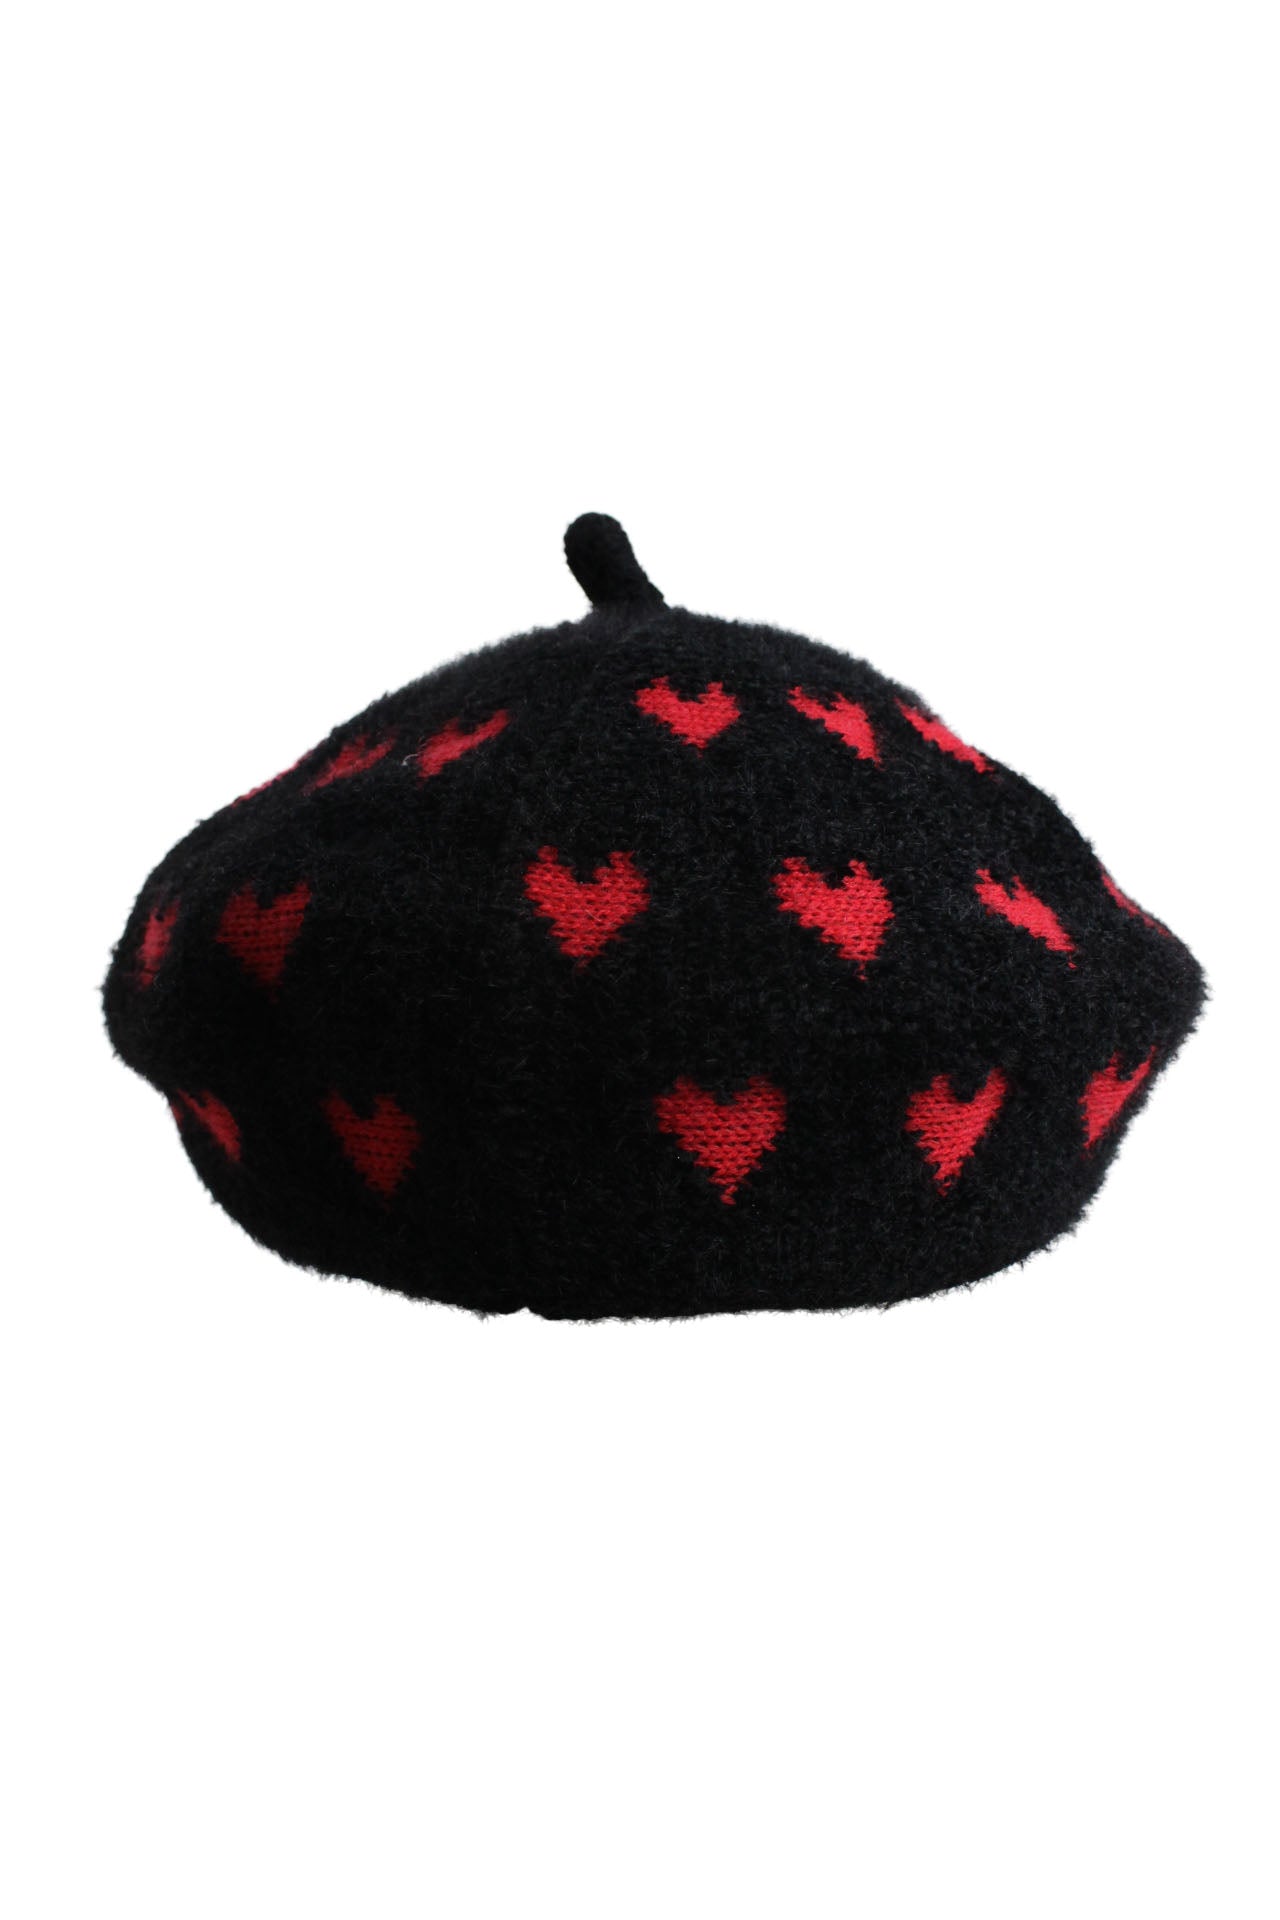 side of black and red heart beanie. 